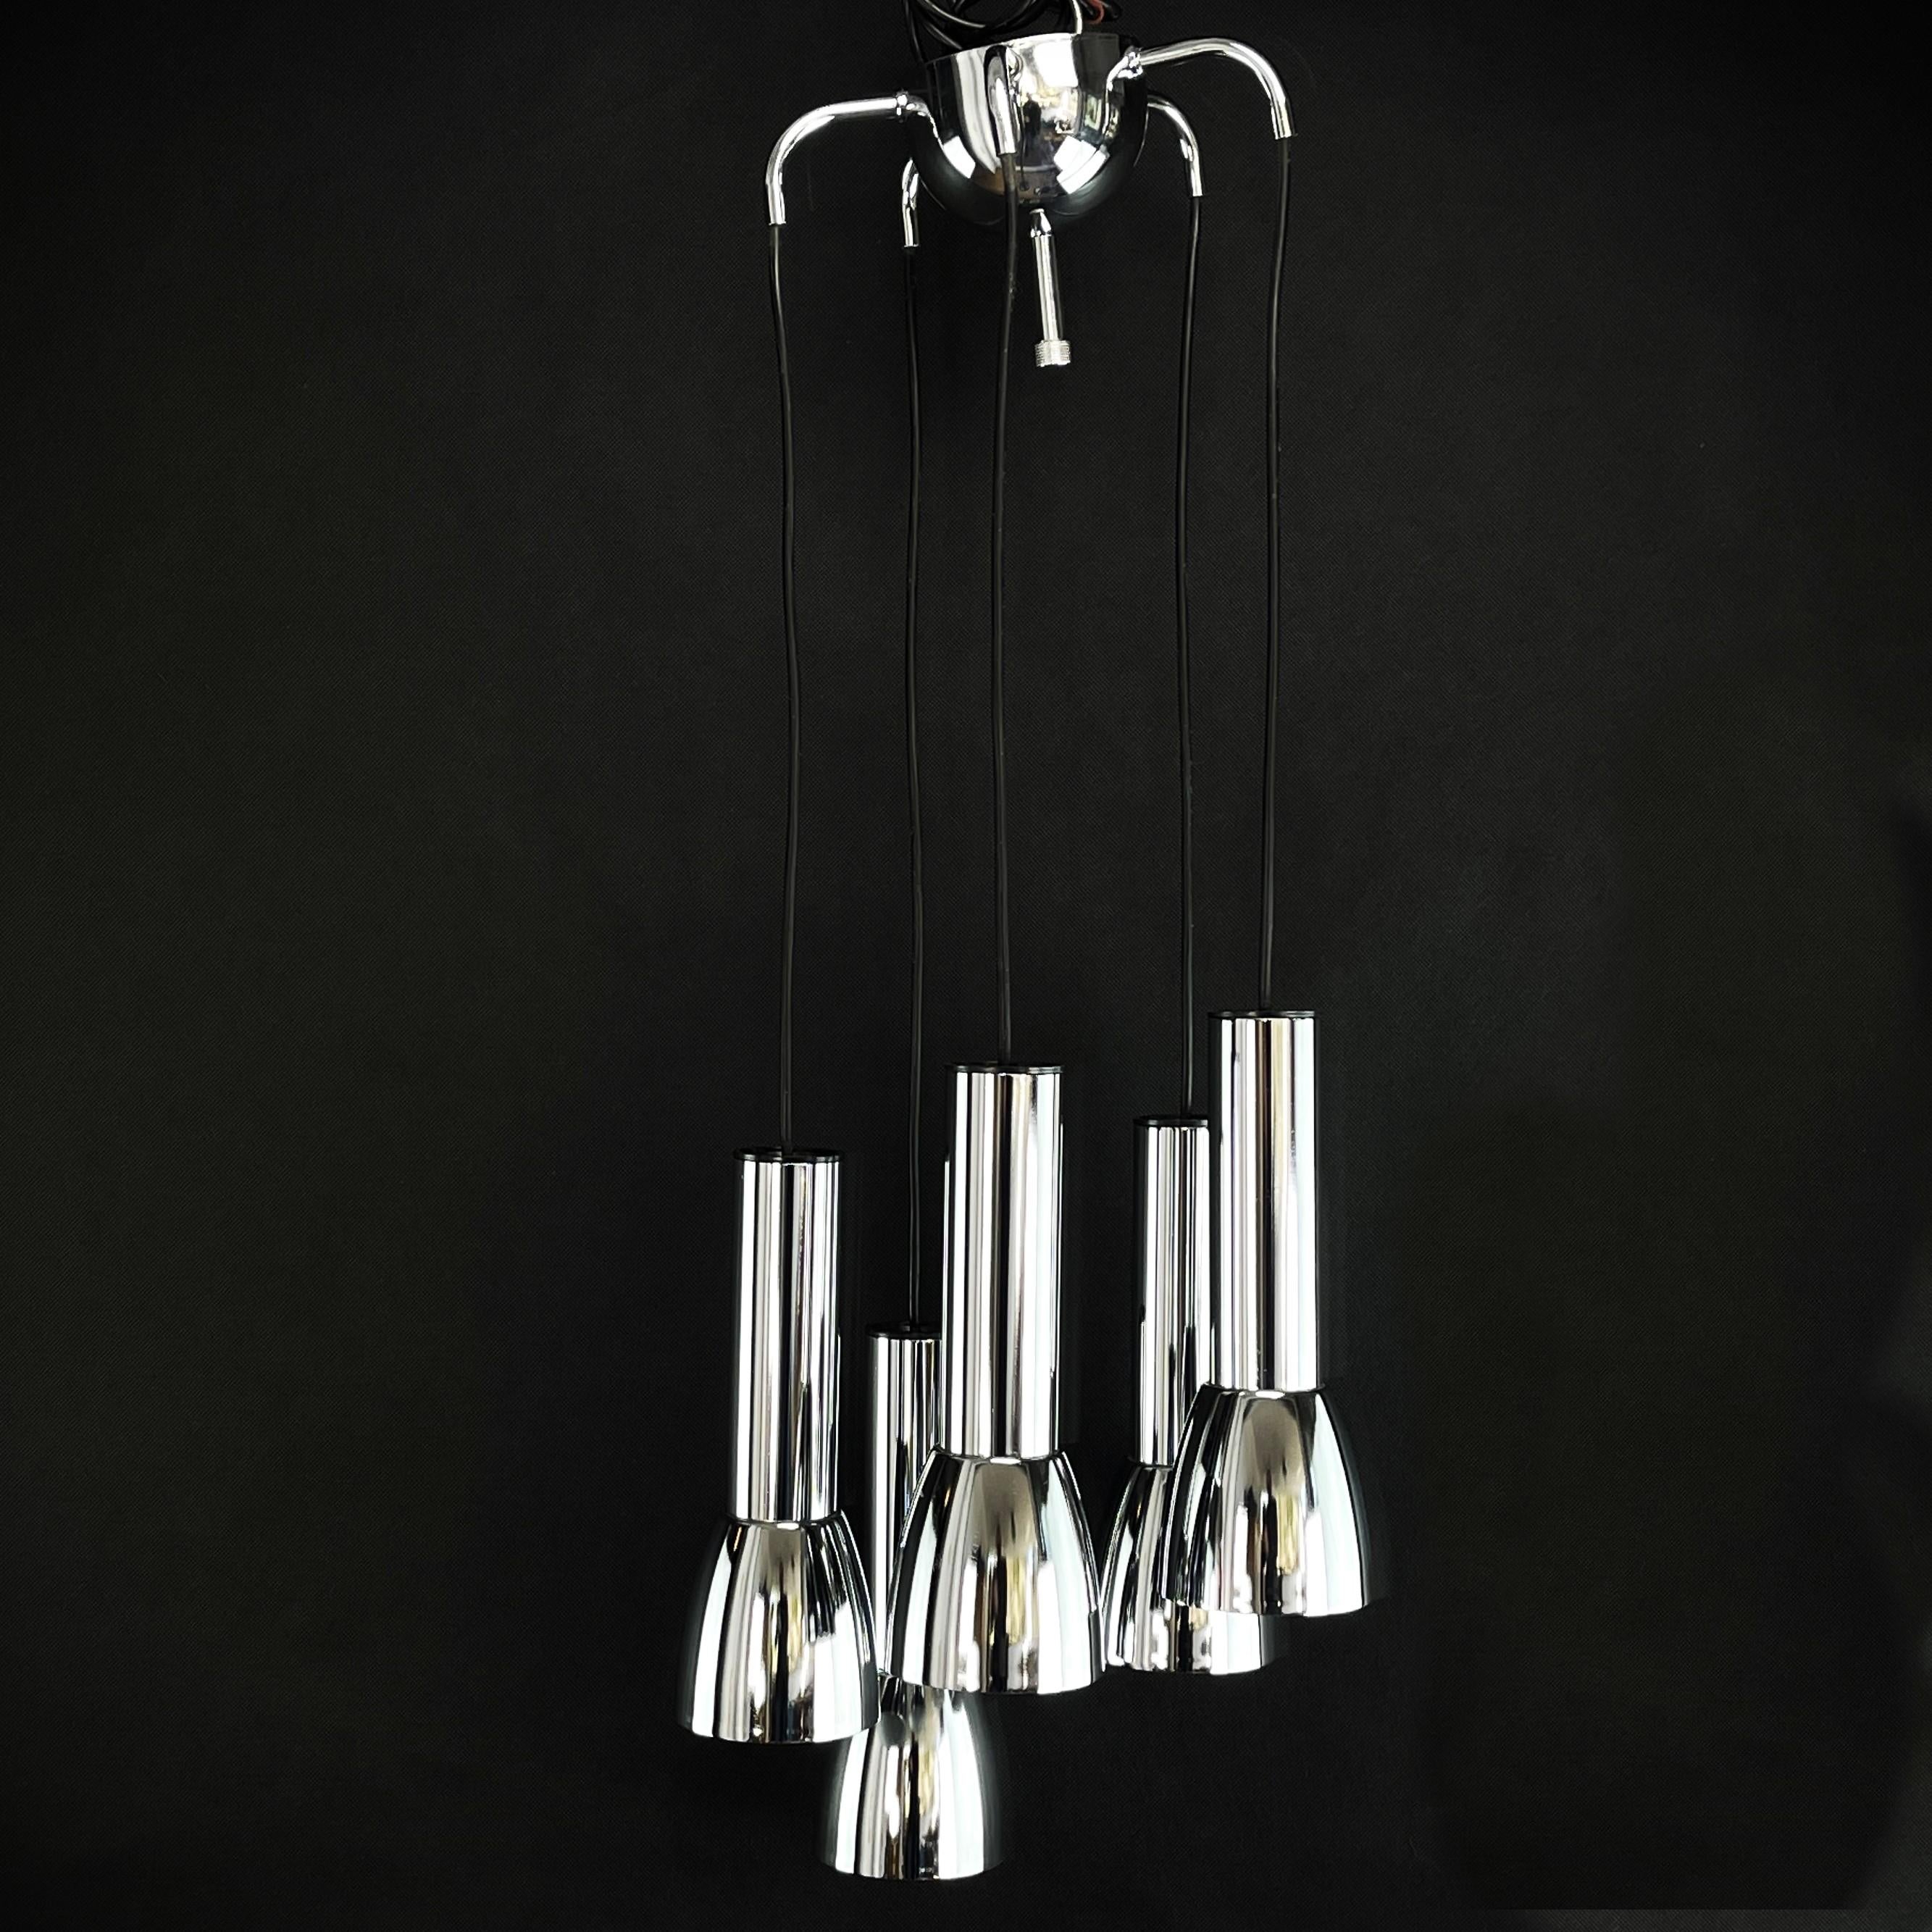 Space age cascade chandelier chrome 

This 5 arm chrome cascade chandelier from the 1970s embodies the futuristic space age style of the era. This stunning chandelier consists of a central chrome frame from which five arms extend, each equipped